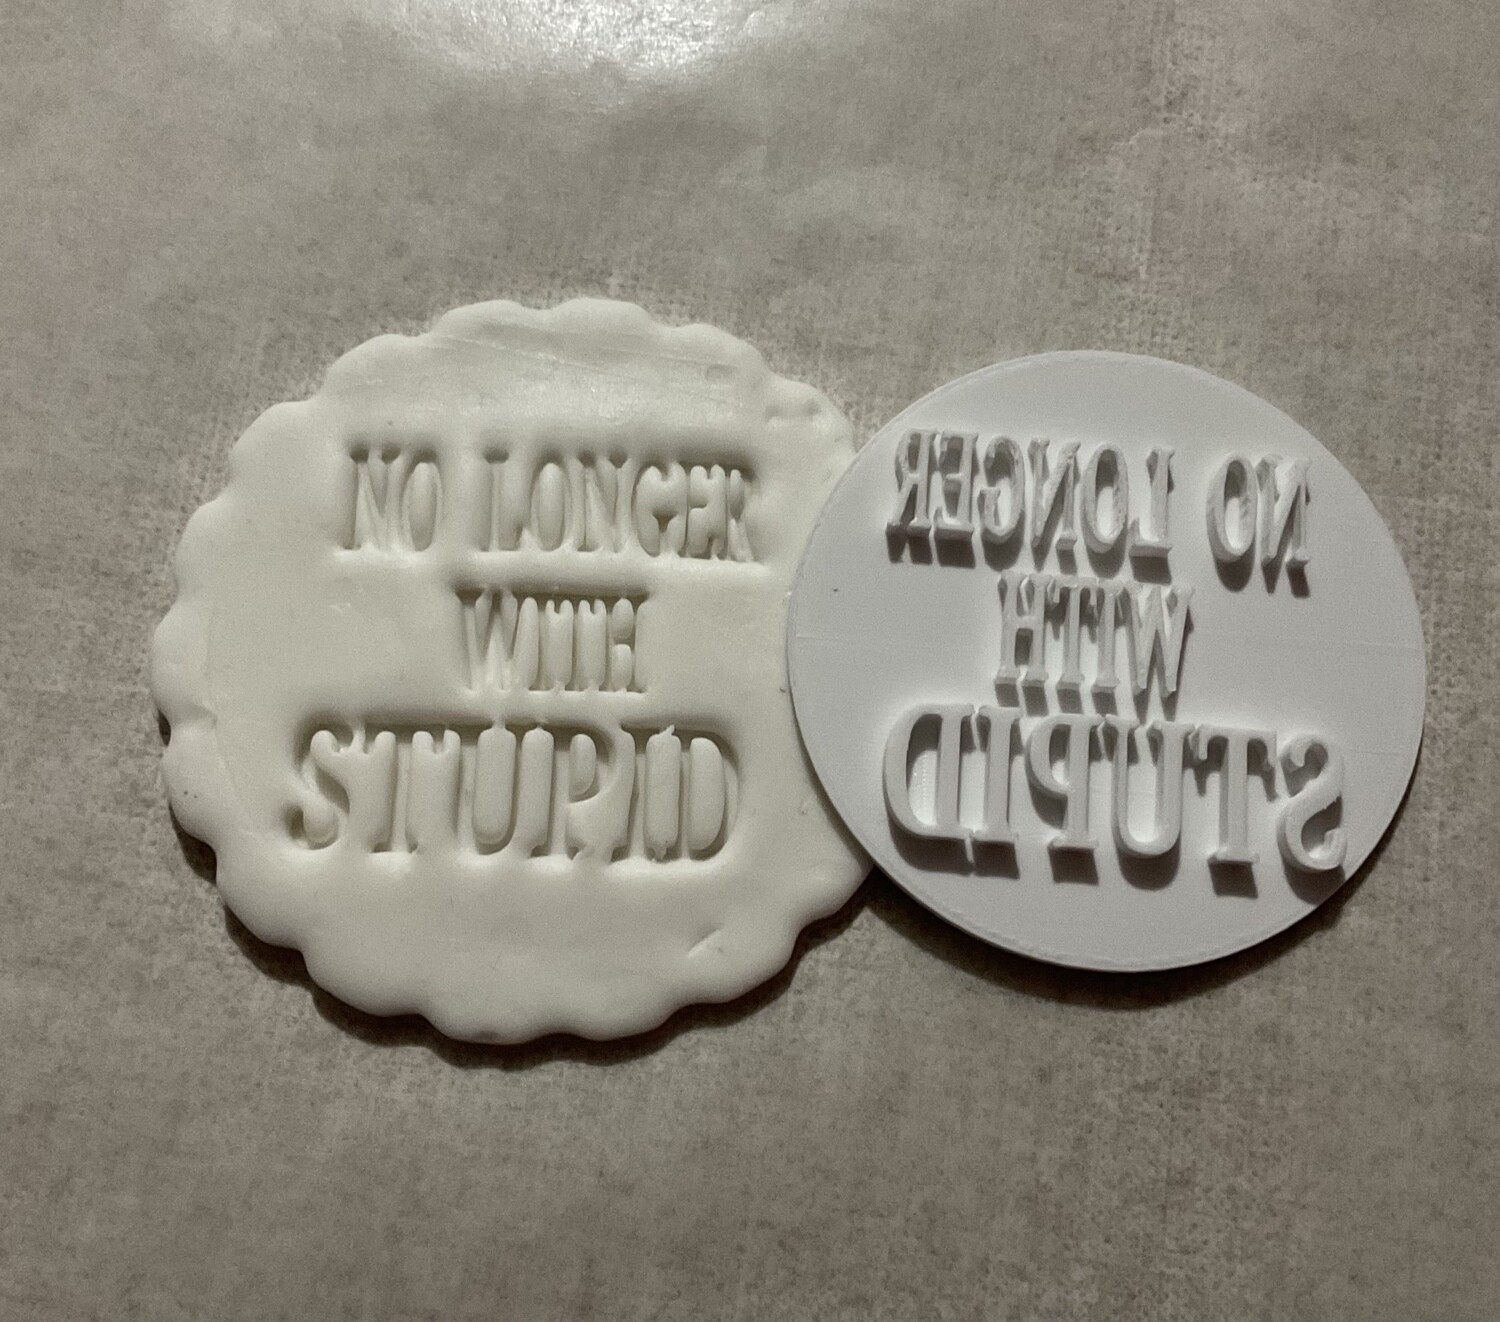 No longer with Stupid